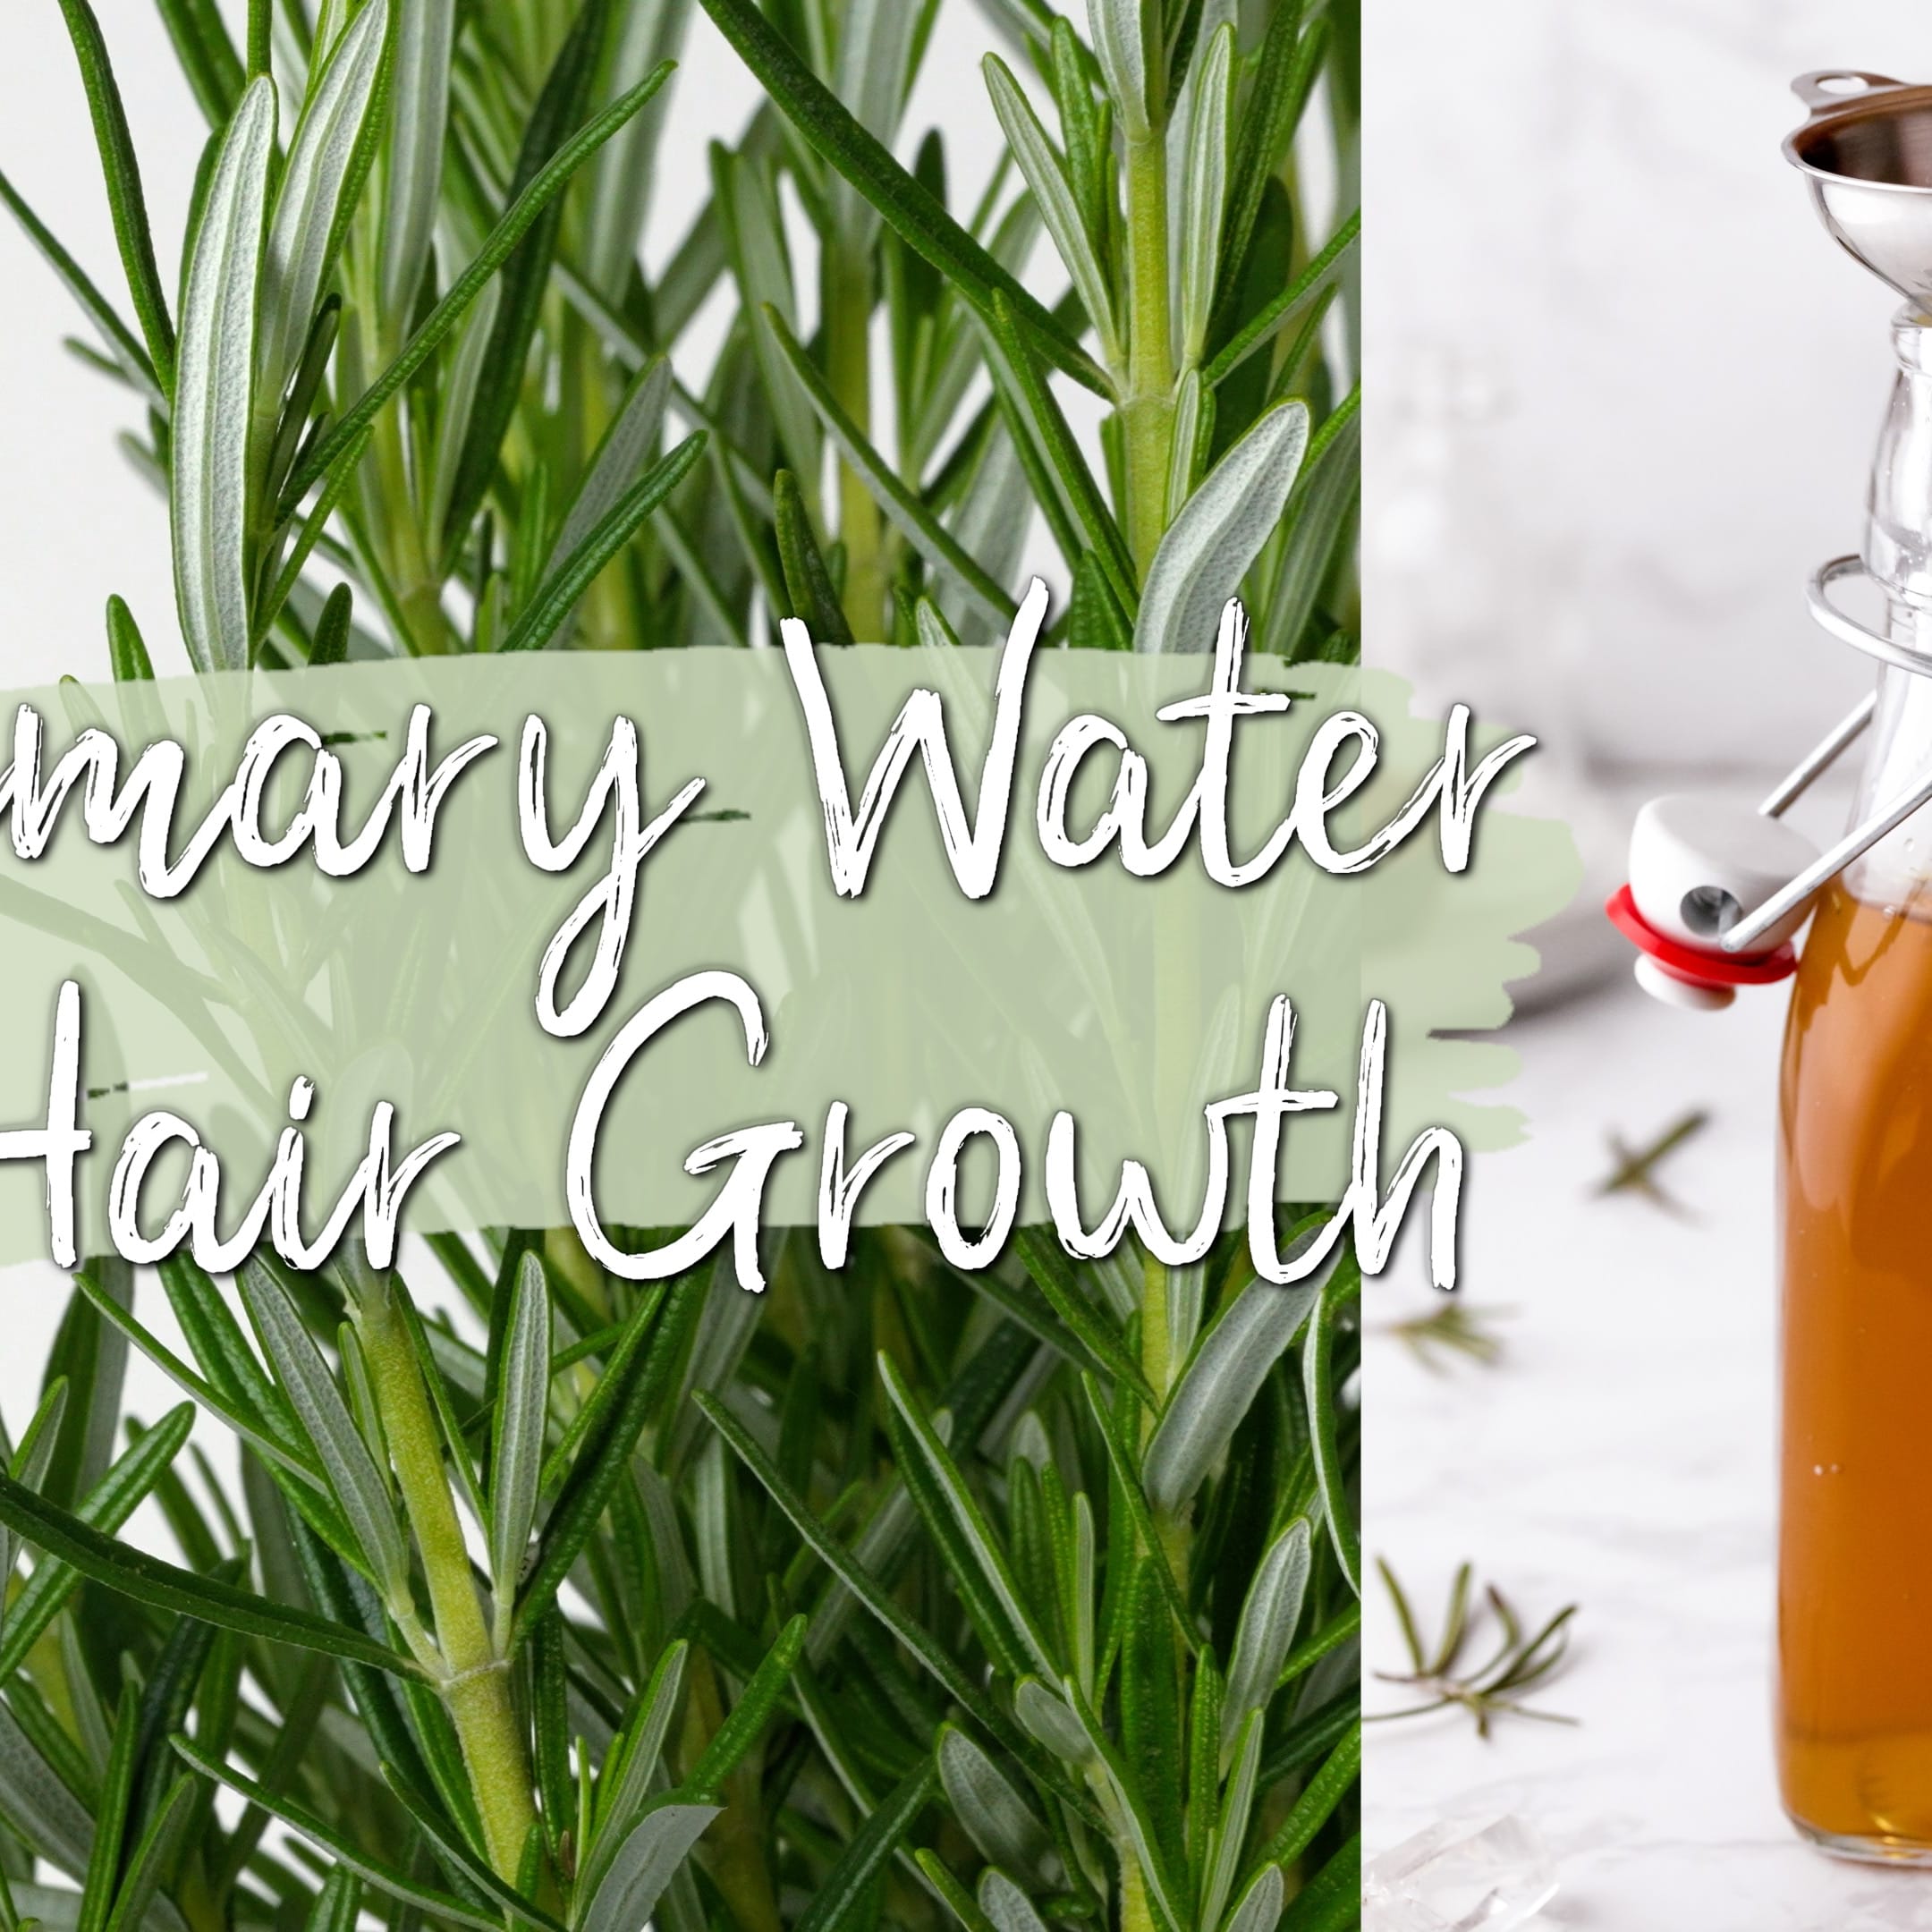 Does Rosemary Water Make Your Hair Grow Faster?